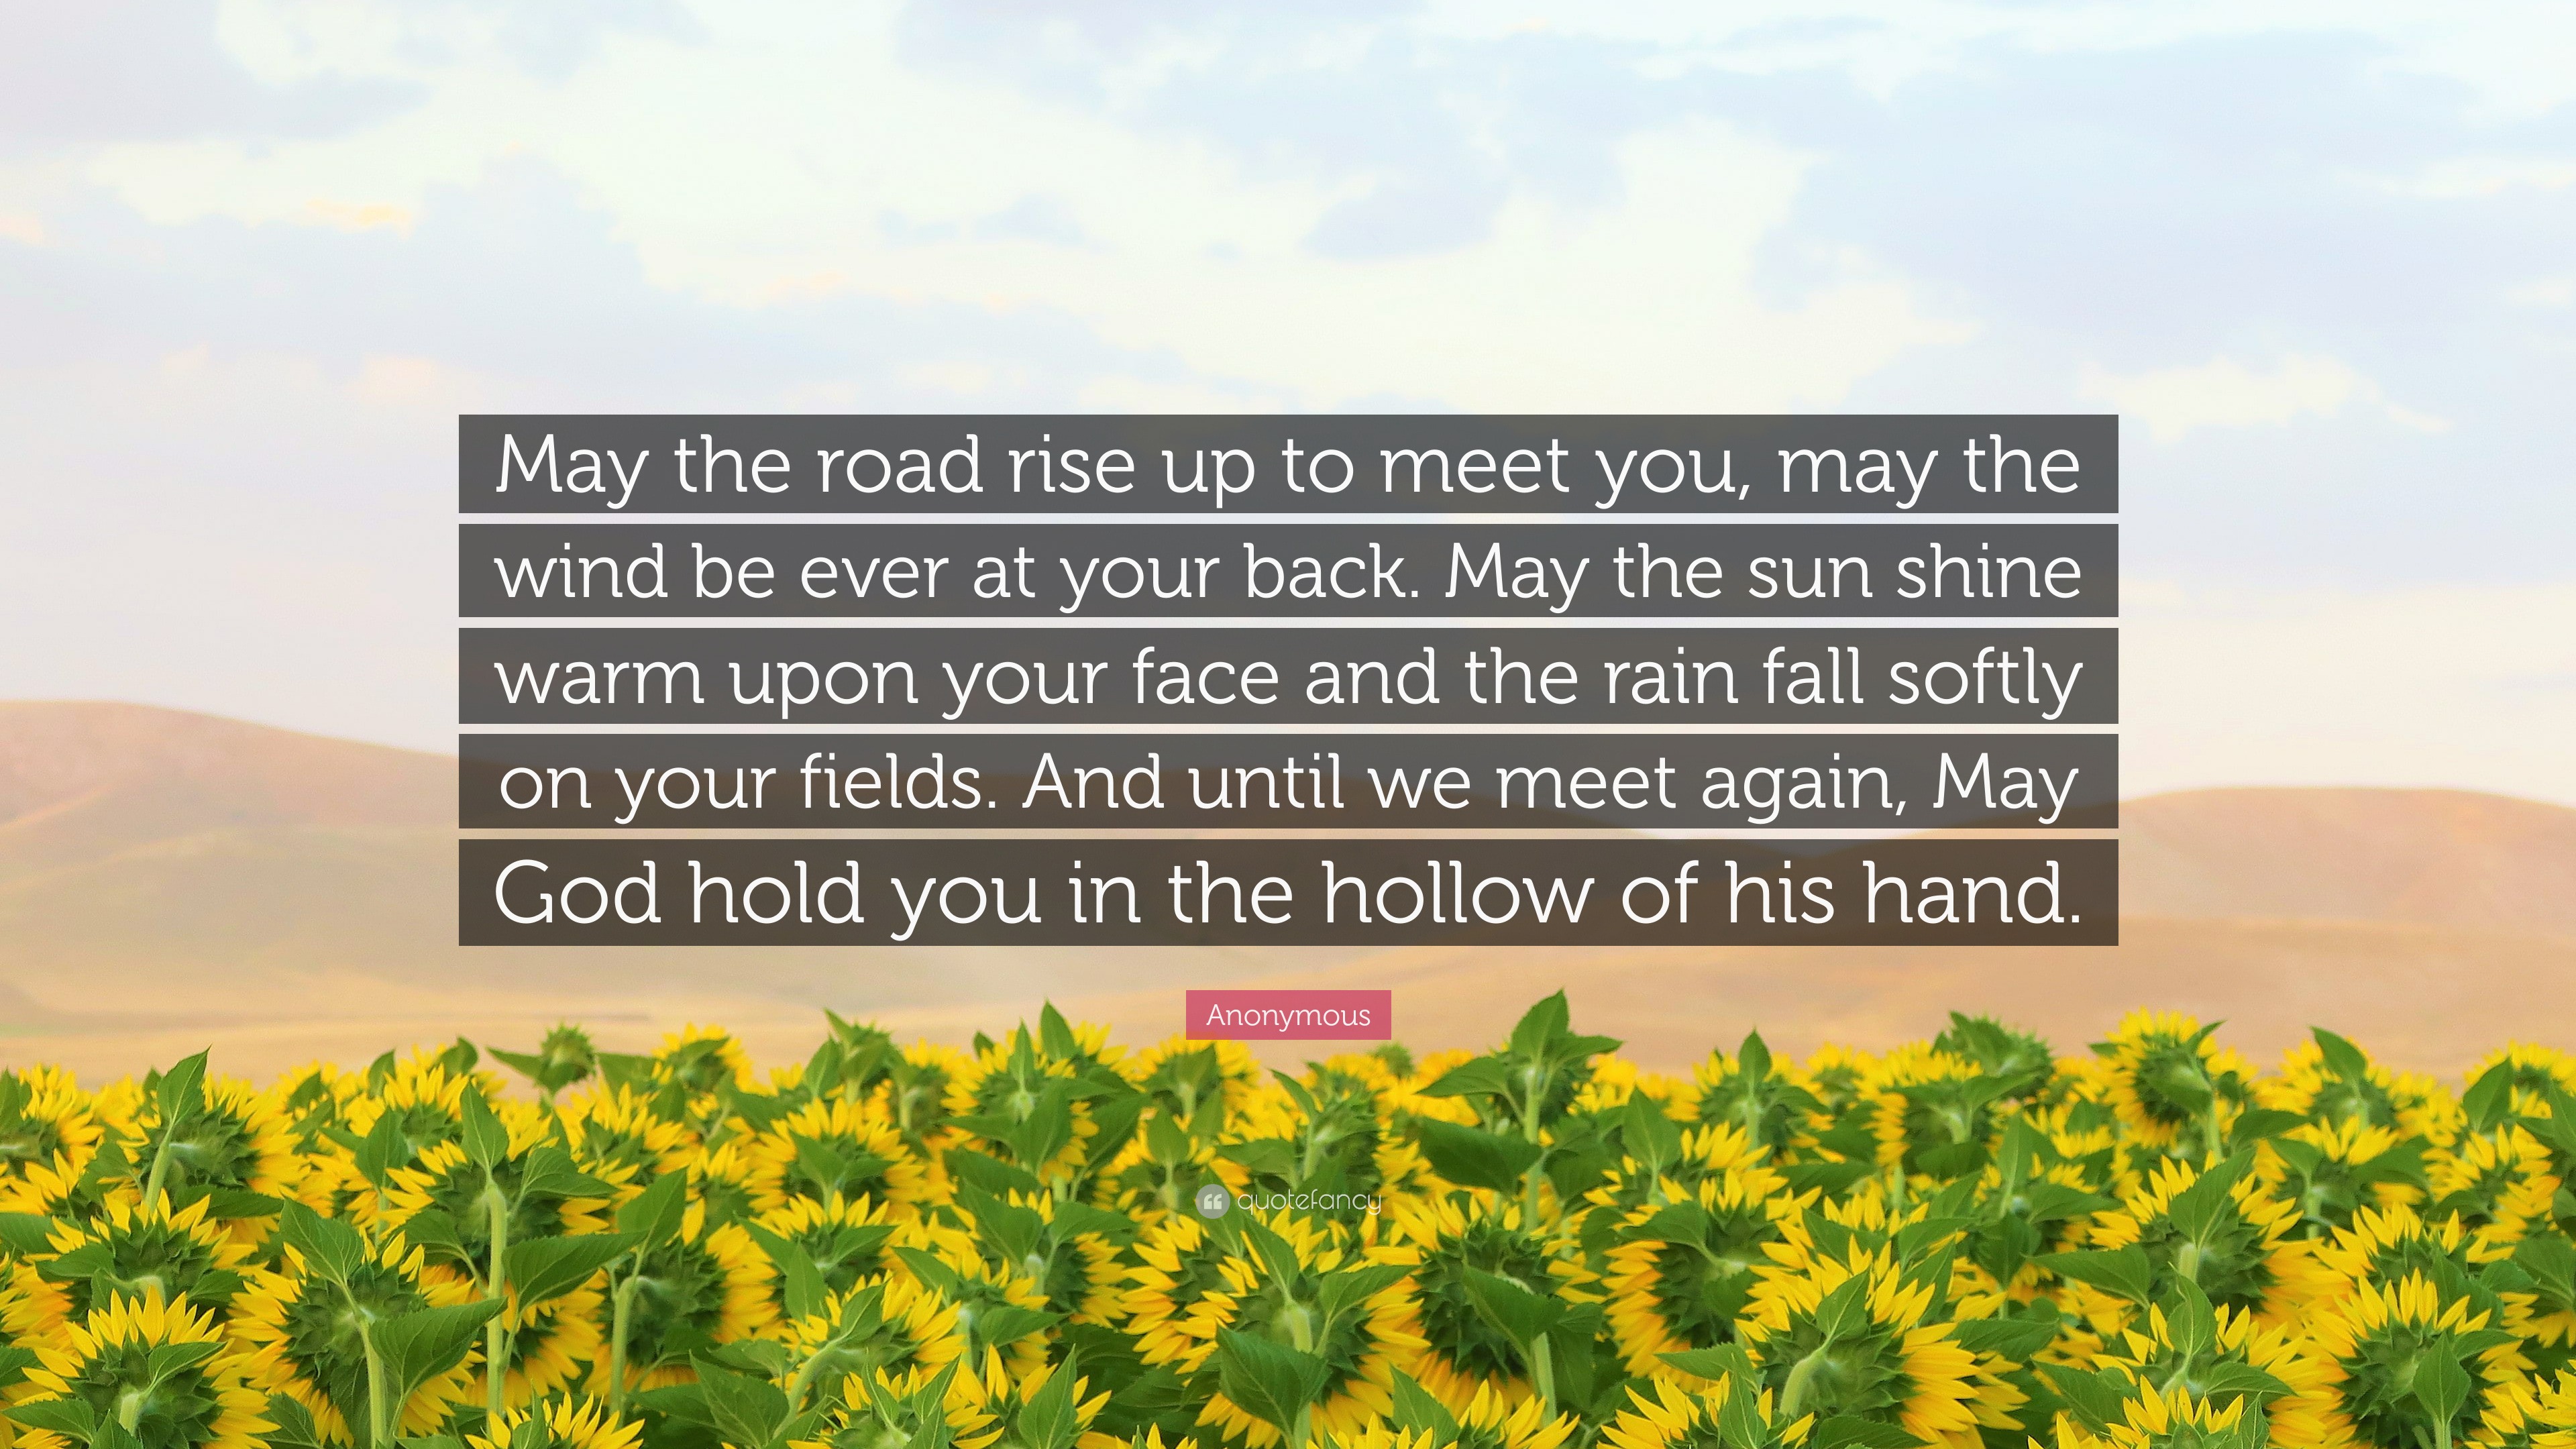 Anonymous Quote May The Road Rise Up To Meet You May The Wind Be Ever At Your Back May The Sun Shine Warm Upon Your Face And The Rain